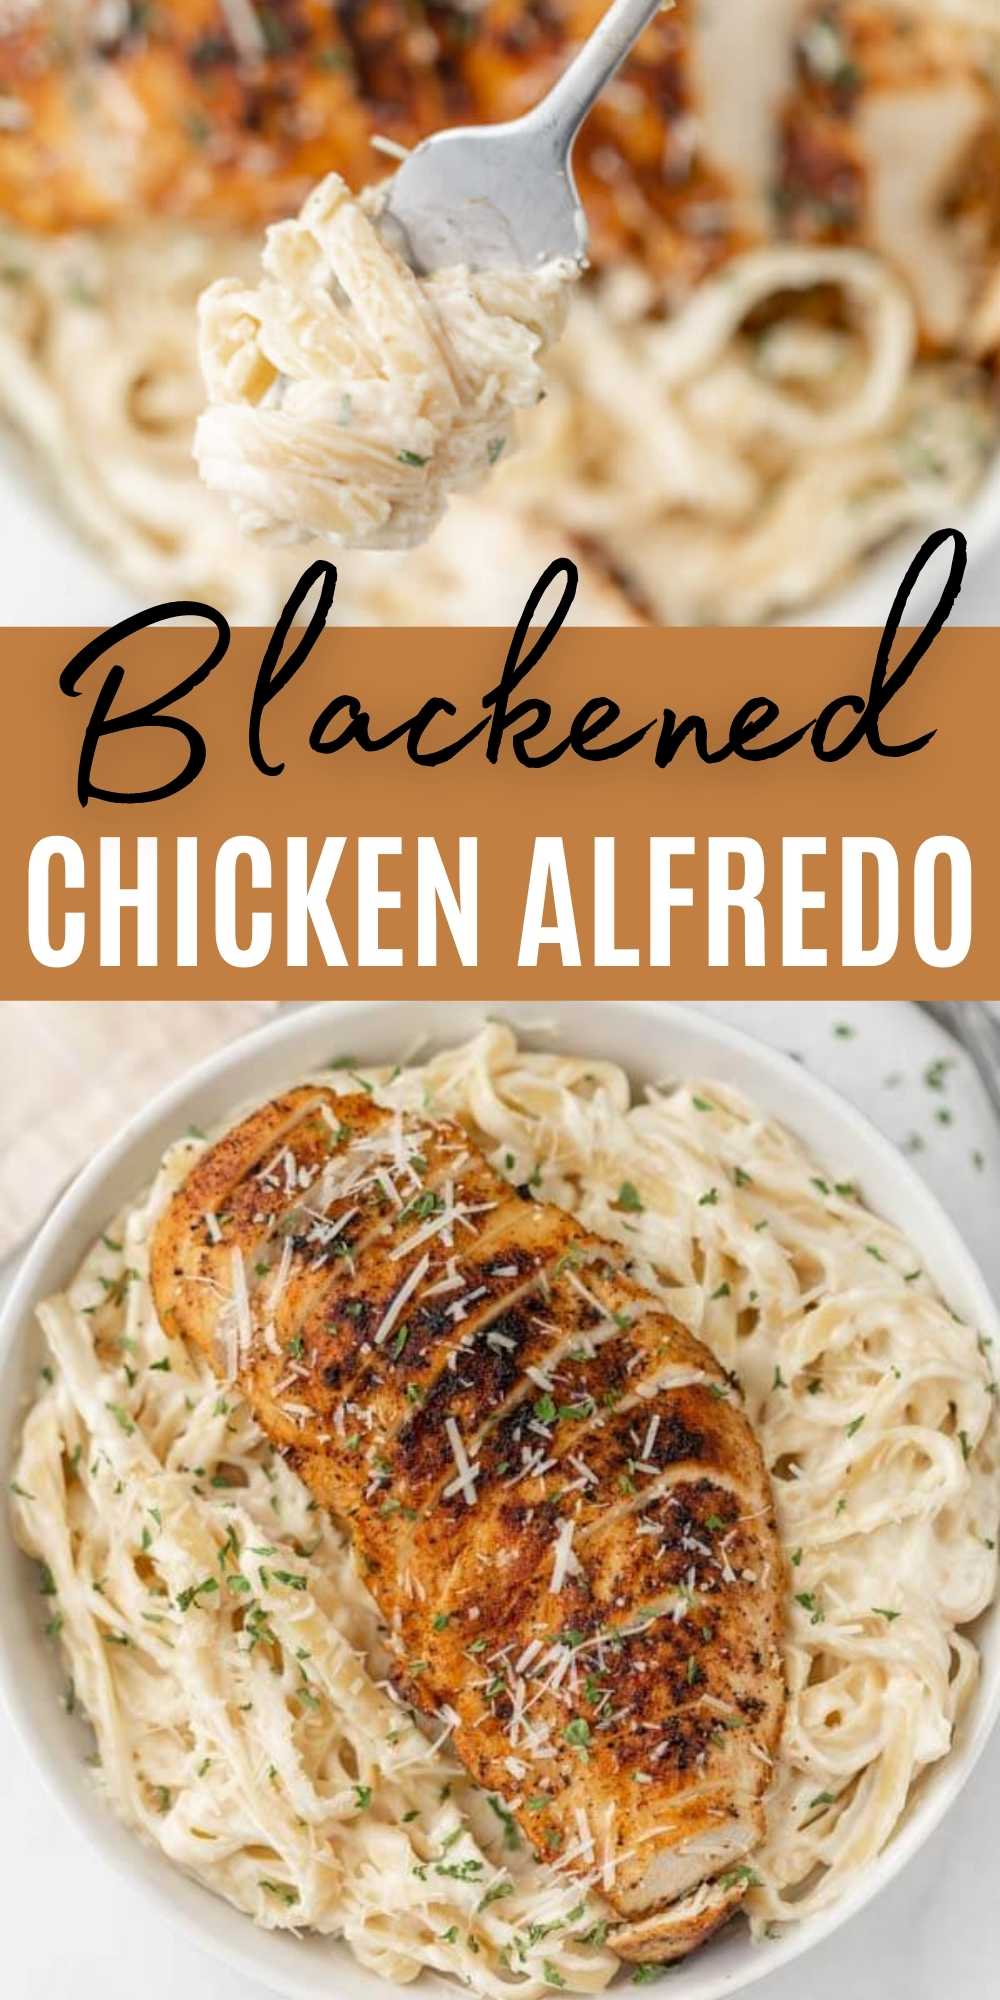 This quick Blackened Chicken Alfredo is easy to make in under 30 minutes! Cajun spice rubbed chicken and creamy pasta combined together make this delicious blackened chicken Alfredo pasta recipe! Everyone loves this easy pasta recipe!  #eatingonadime #blackenedrecipes #chickenrecipes #pastarecipes #easydinners 
